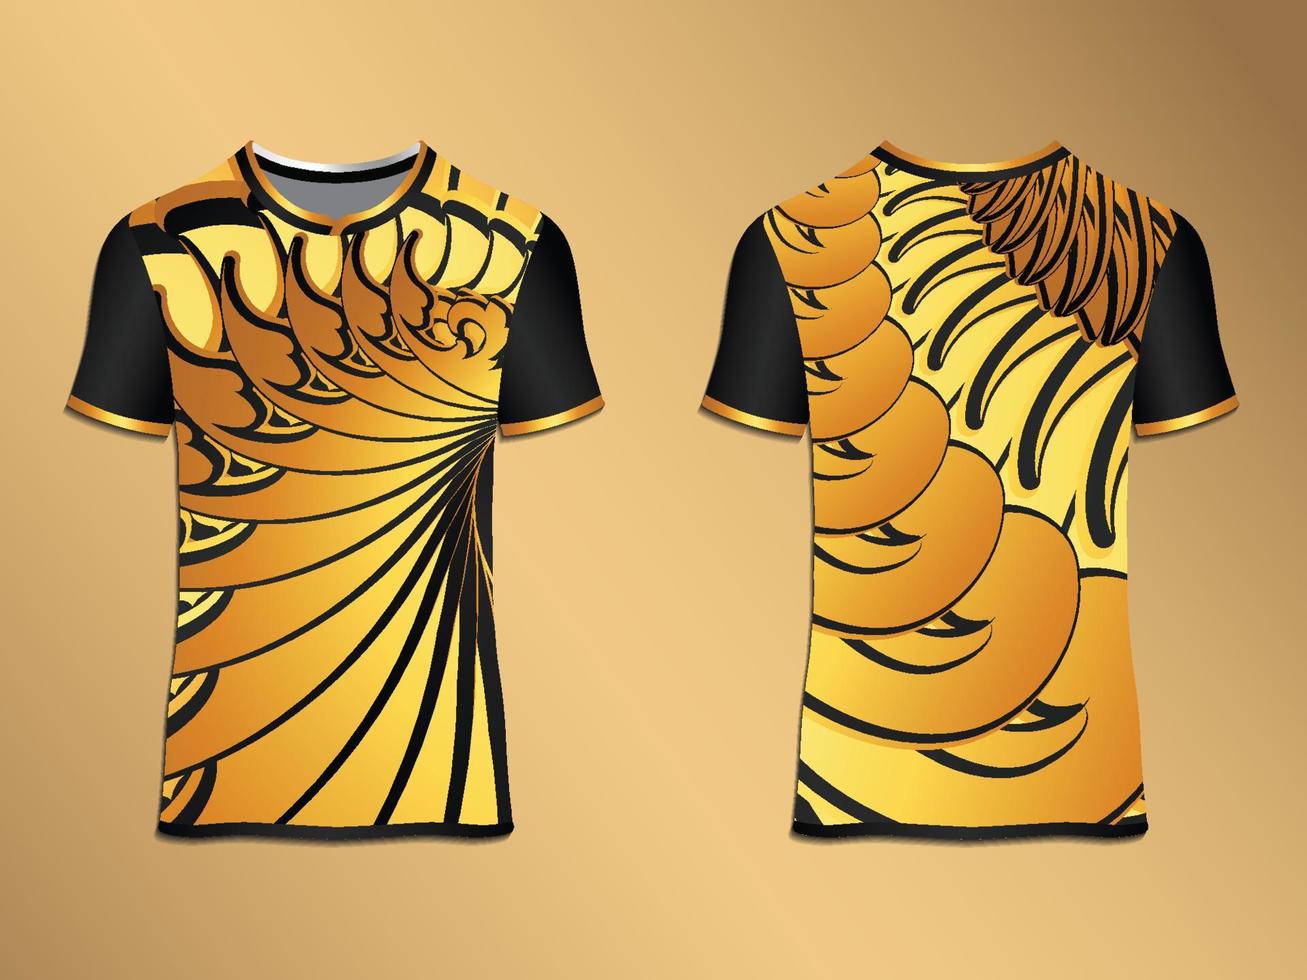 Abstract Tshirt Swirl Gradient Decorative Gold Background vector